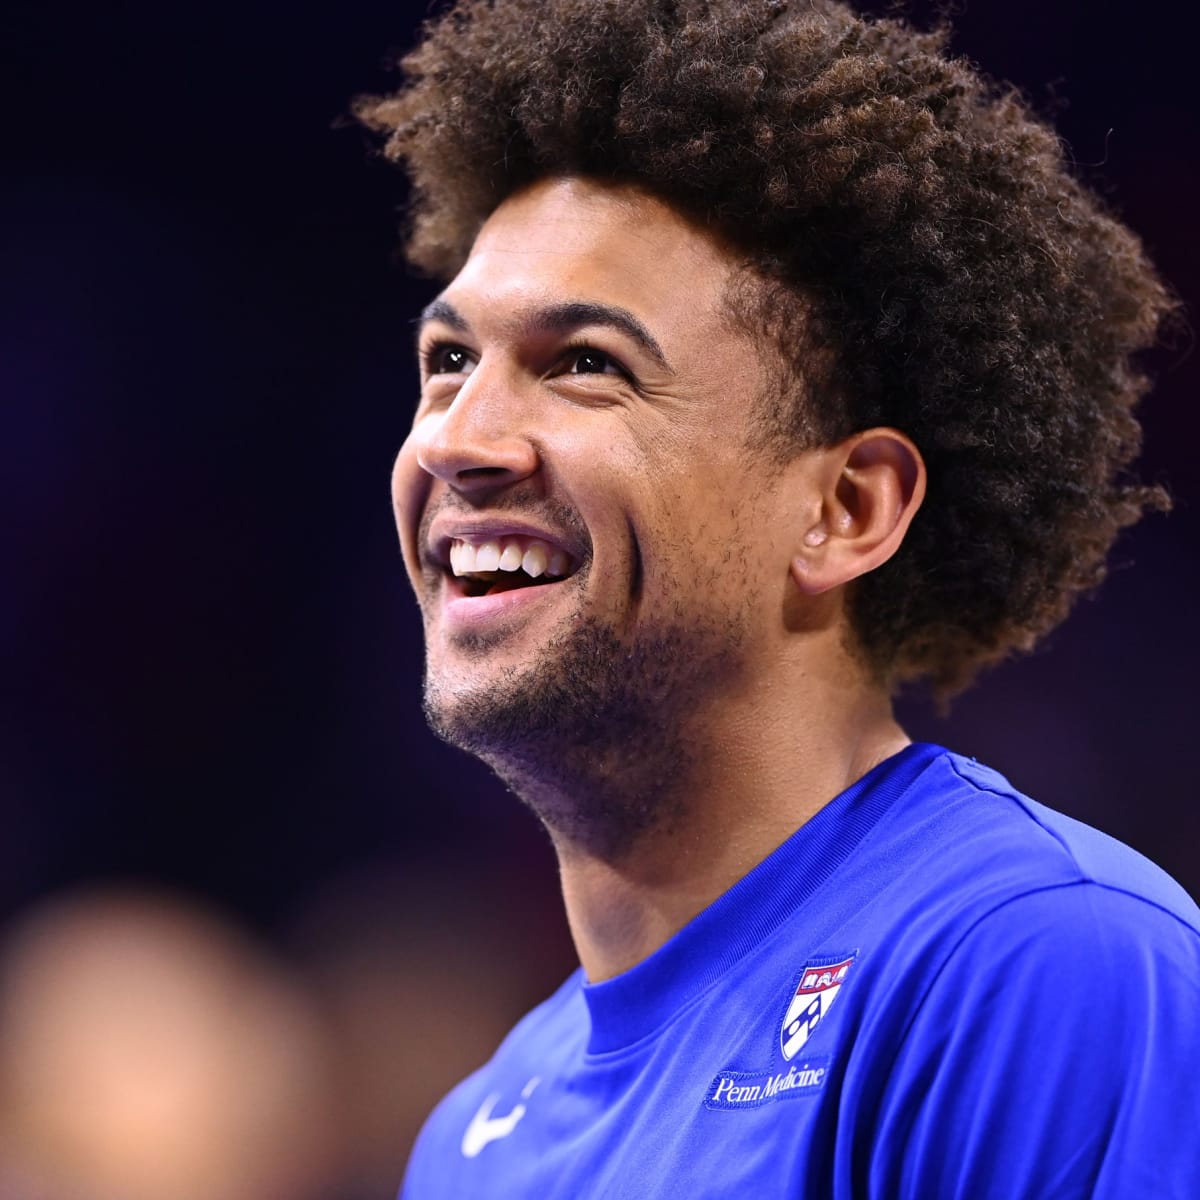 Matisse Thybulle's Mural Ruined After Trade Away From Sixers - Sports  Illustrated Philadelphia 76ers News, Analysis and More